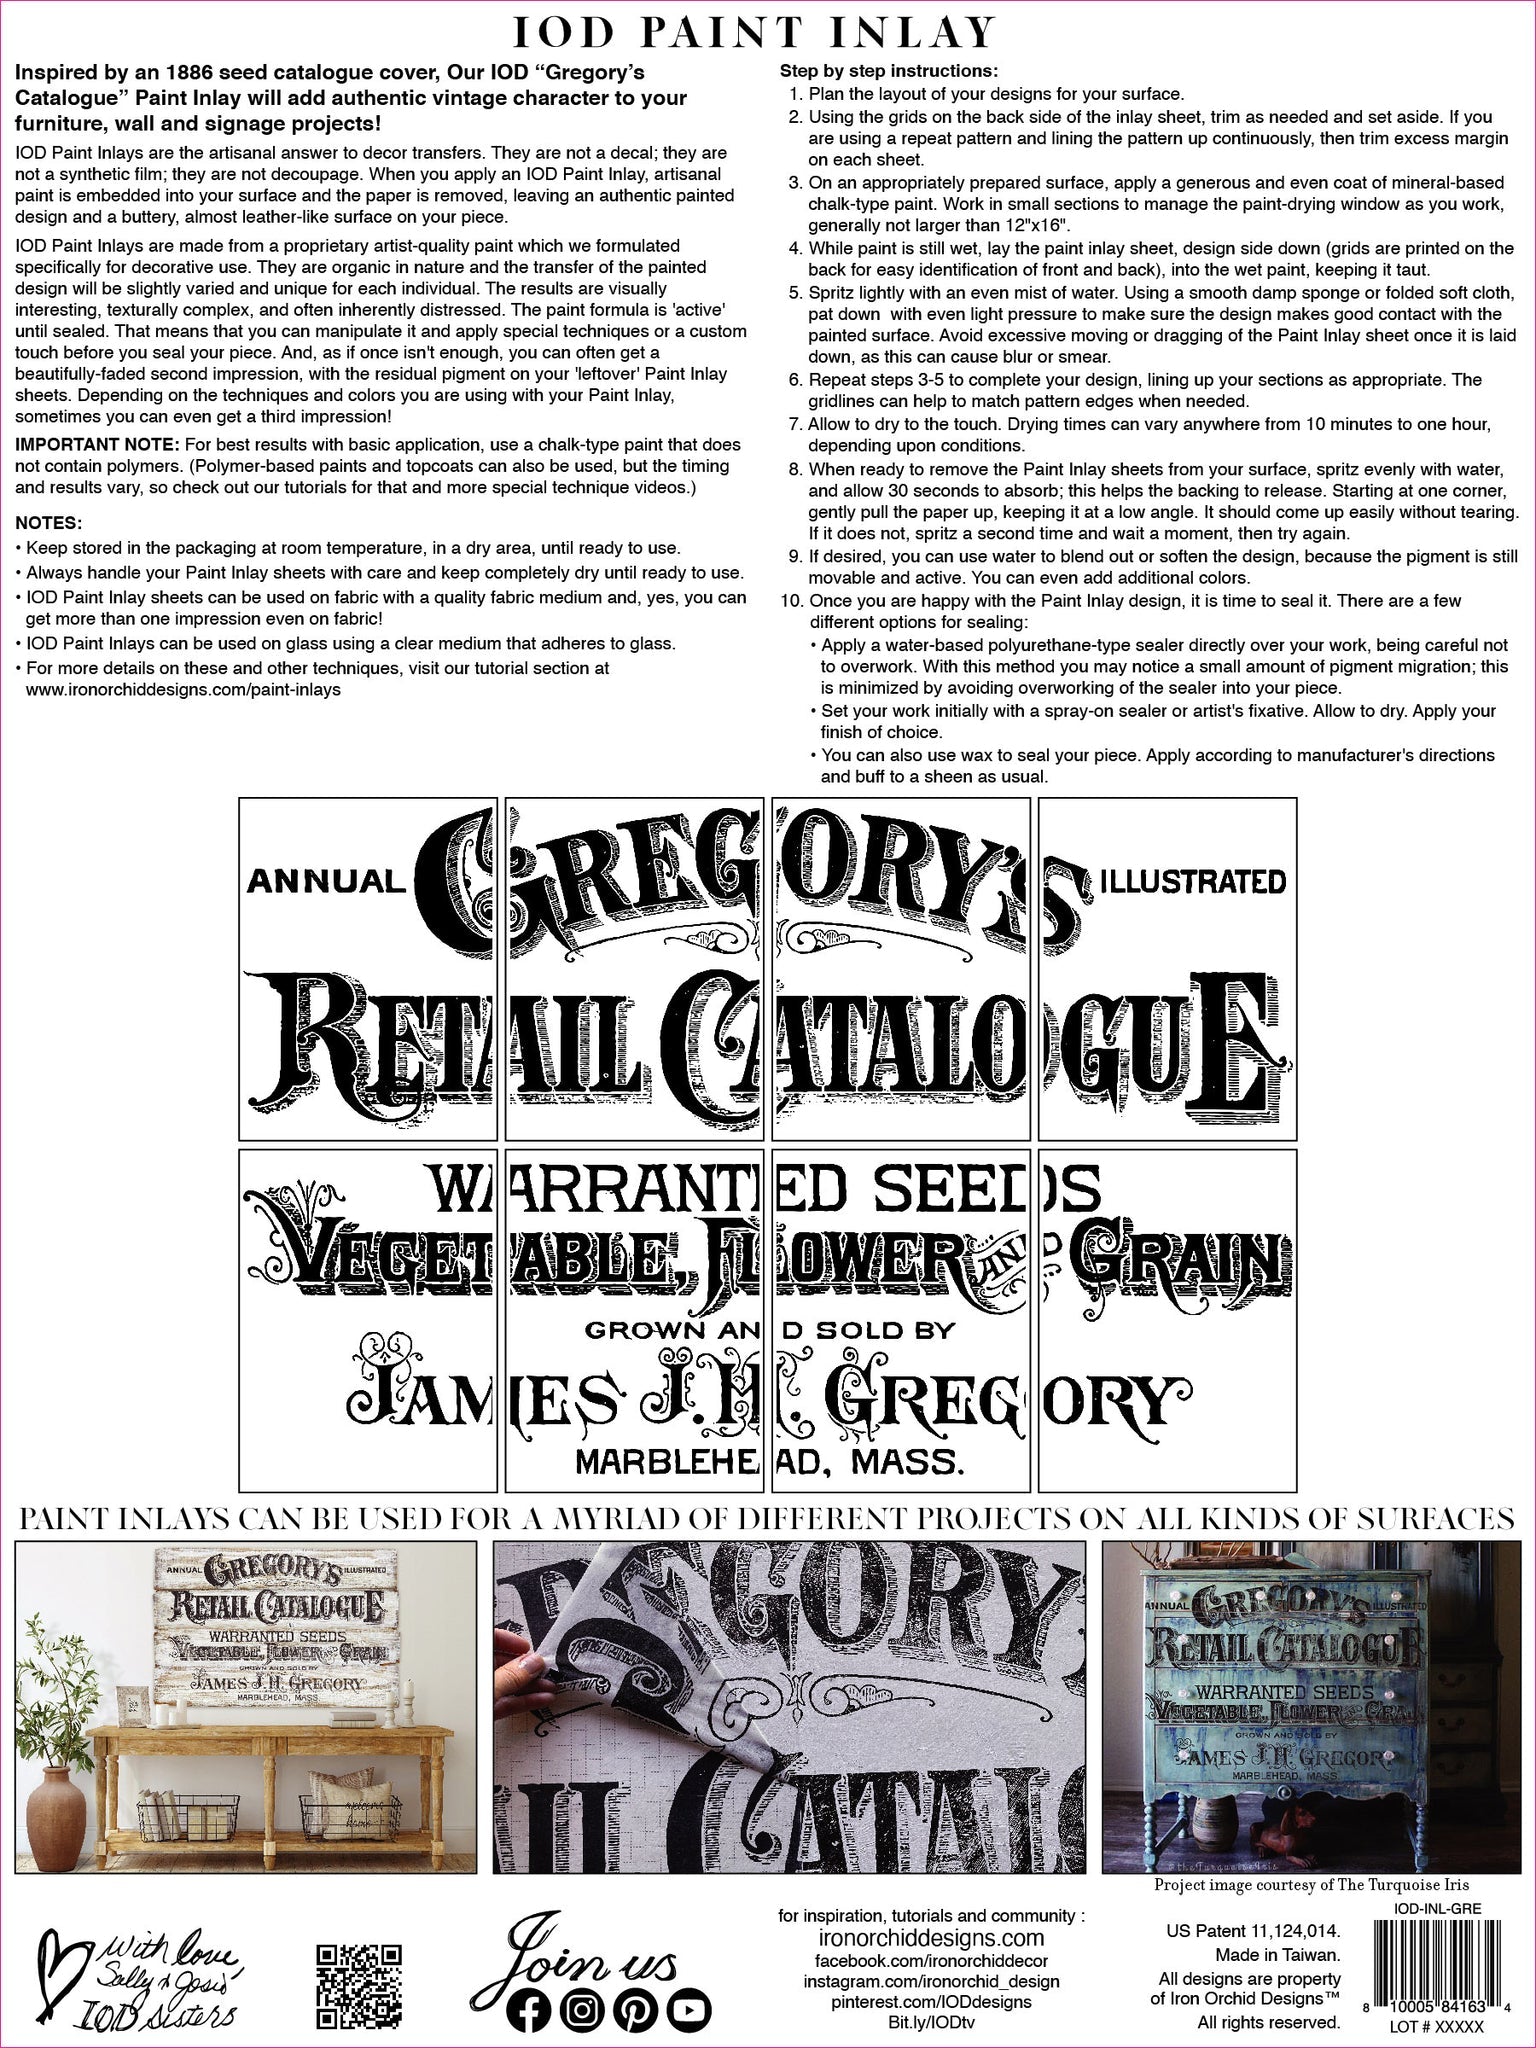 Iron Orchid Designs - Gregory's Catalogue Paint Inlay - Rustic River Home